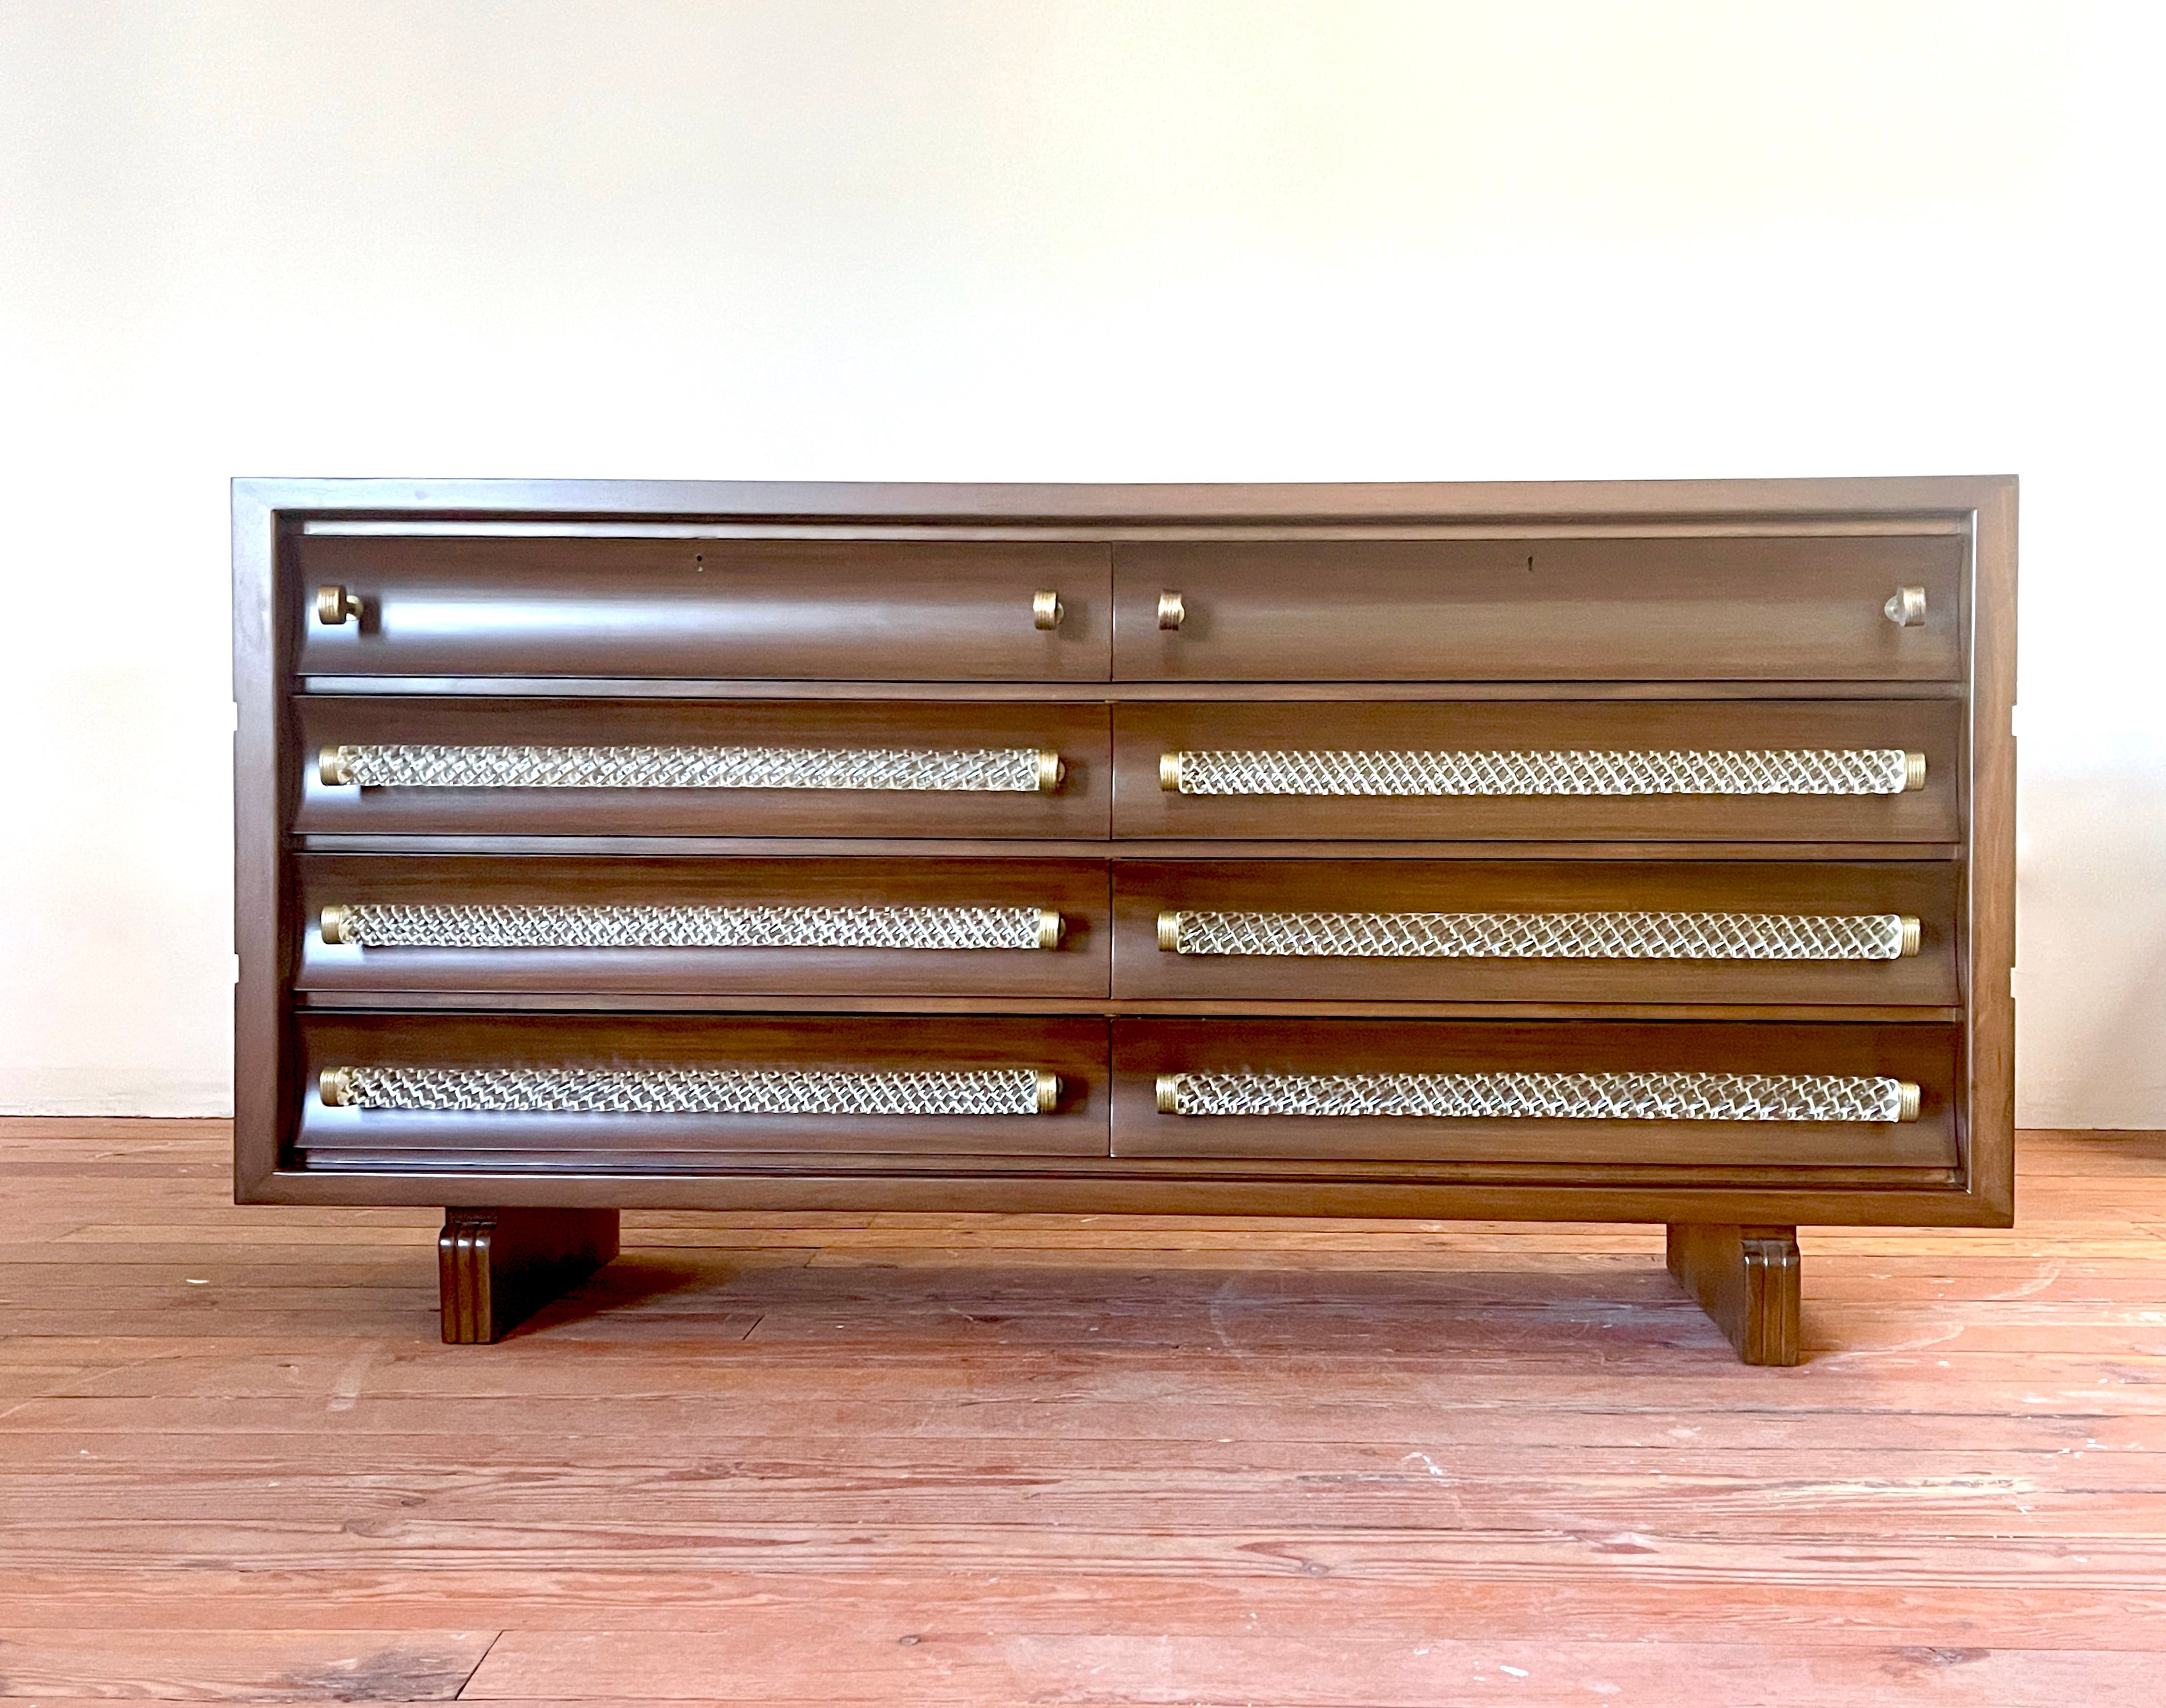 Stunning 1940's Italian chest of drawers designed by Gio Ponti, manufactured by Luigi Scremin.
Murano twisted solid glass handles and thick ornate brass hardware. 
Carved edges and cubist sides newly refinished. 
Total of 8 drawers / original key